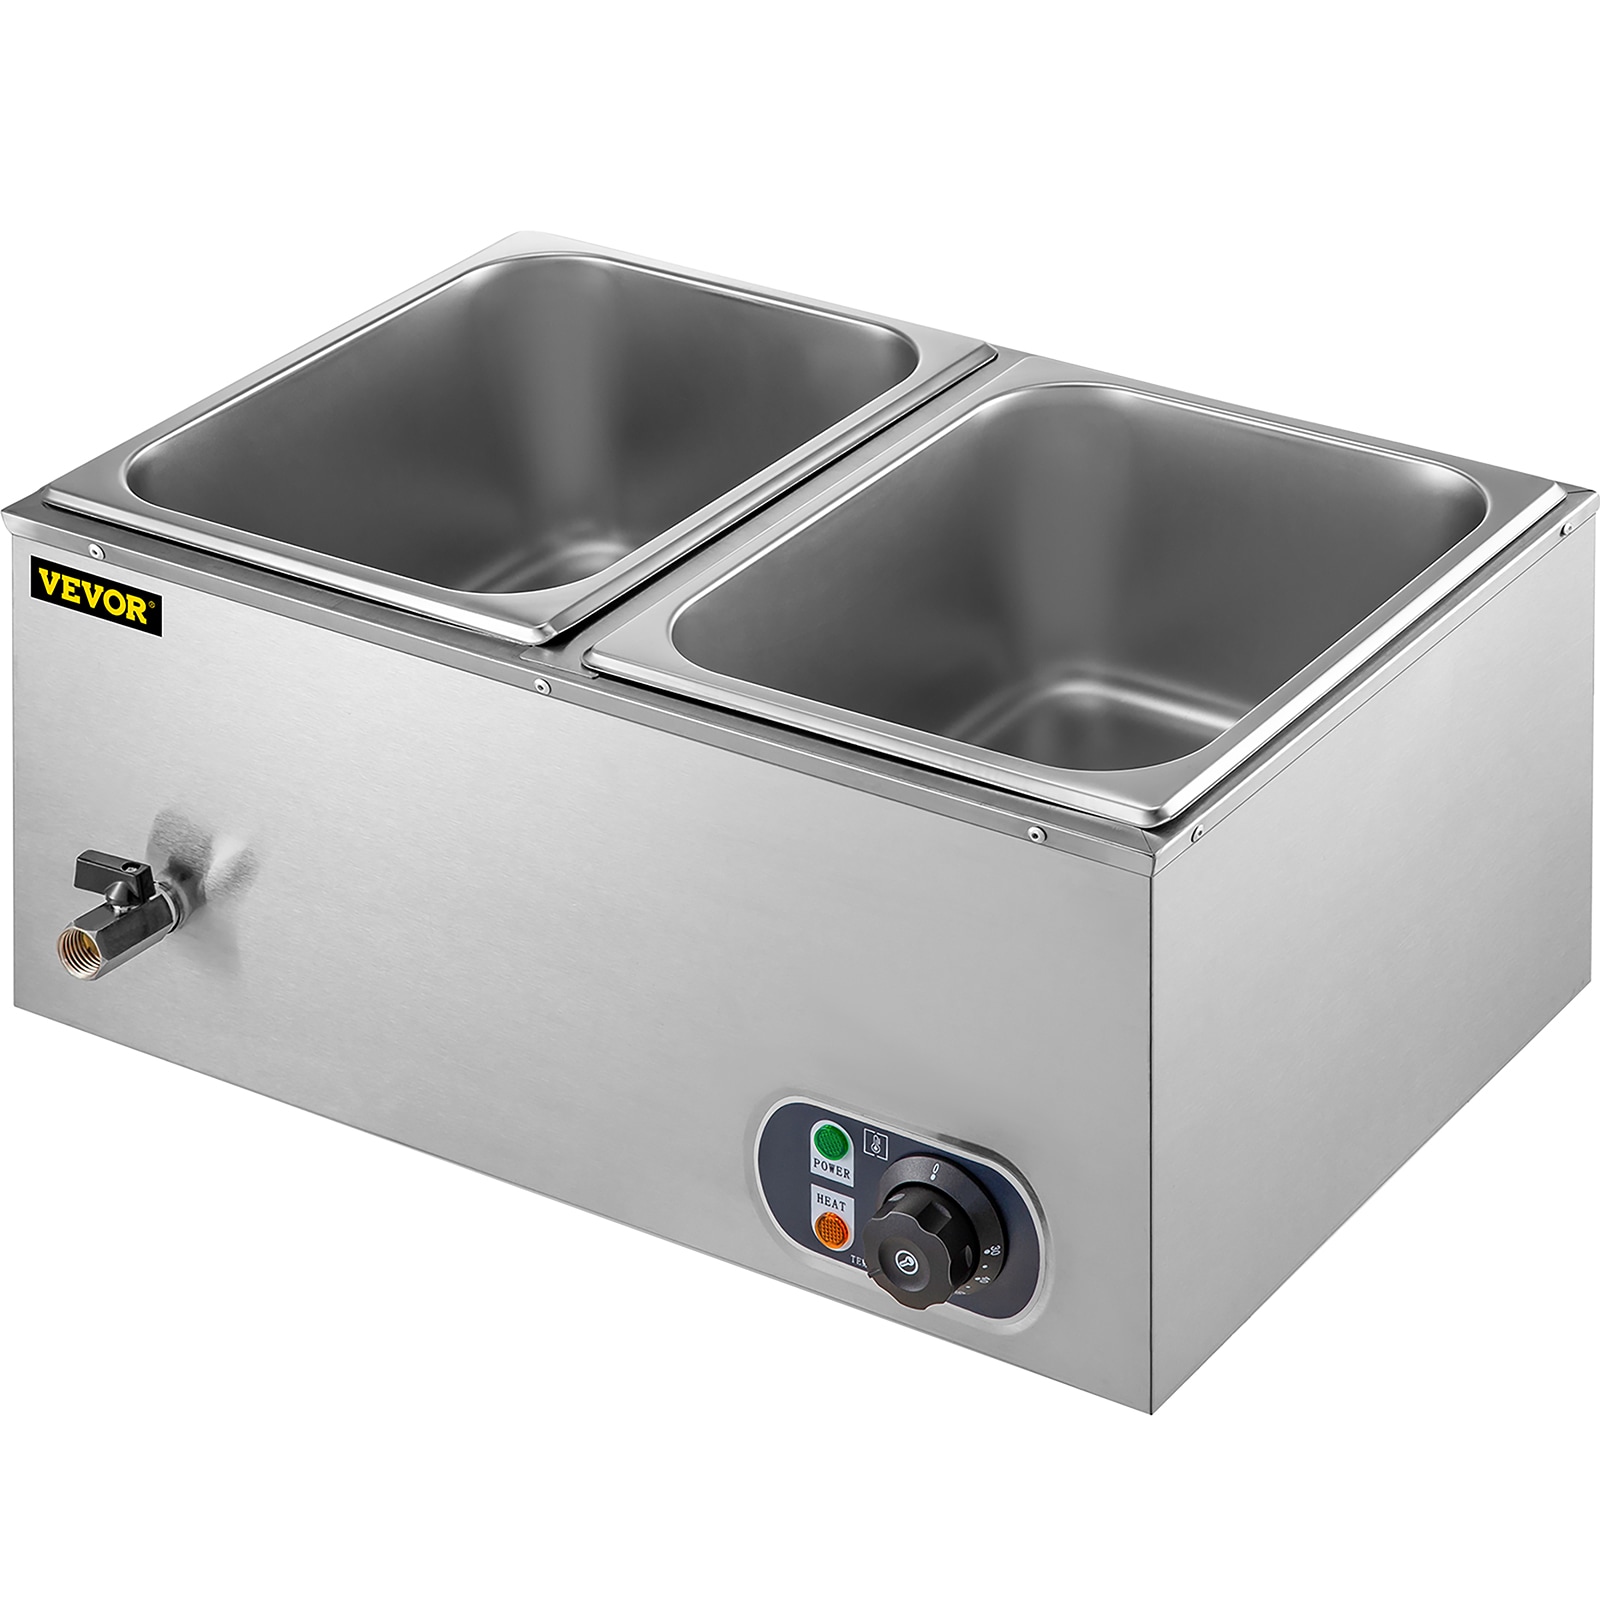 Eurolab 3 Tray Stainless Steel Buffet Service Warmer with Thermostat 2 